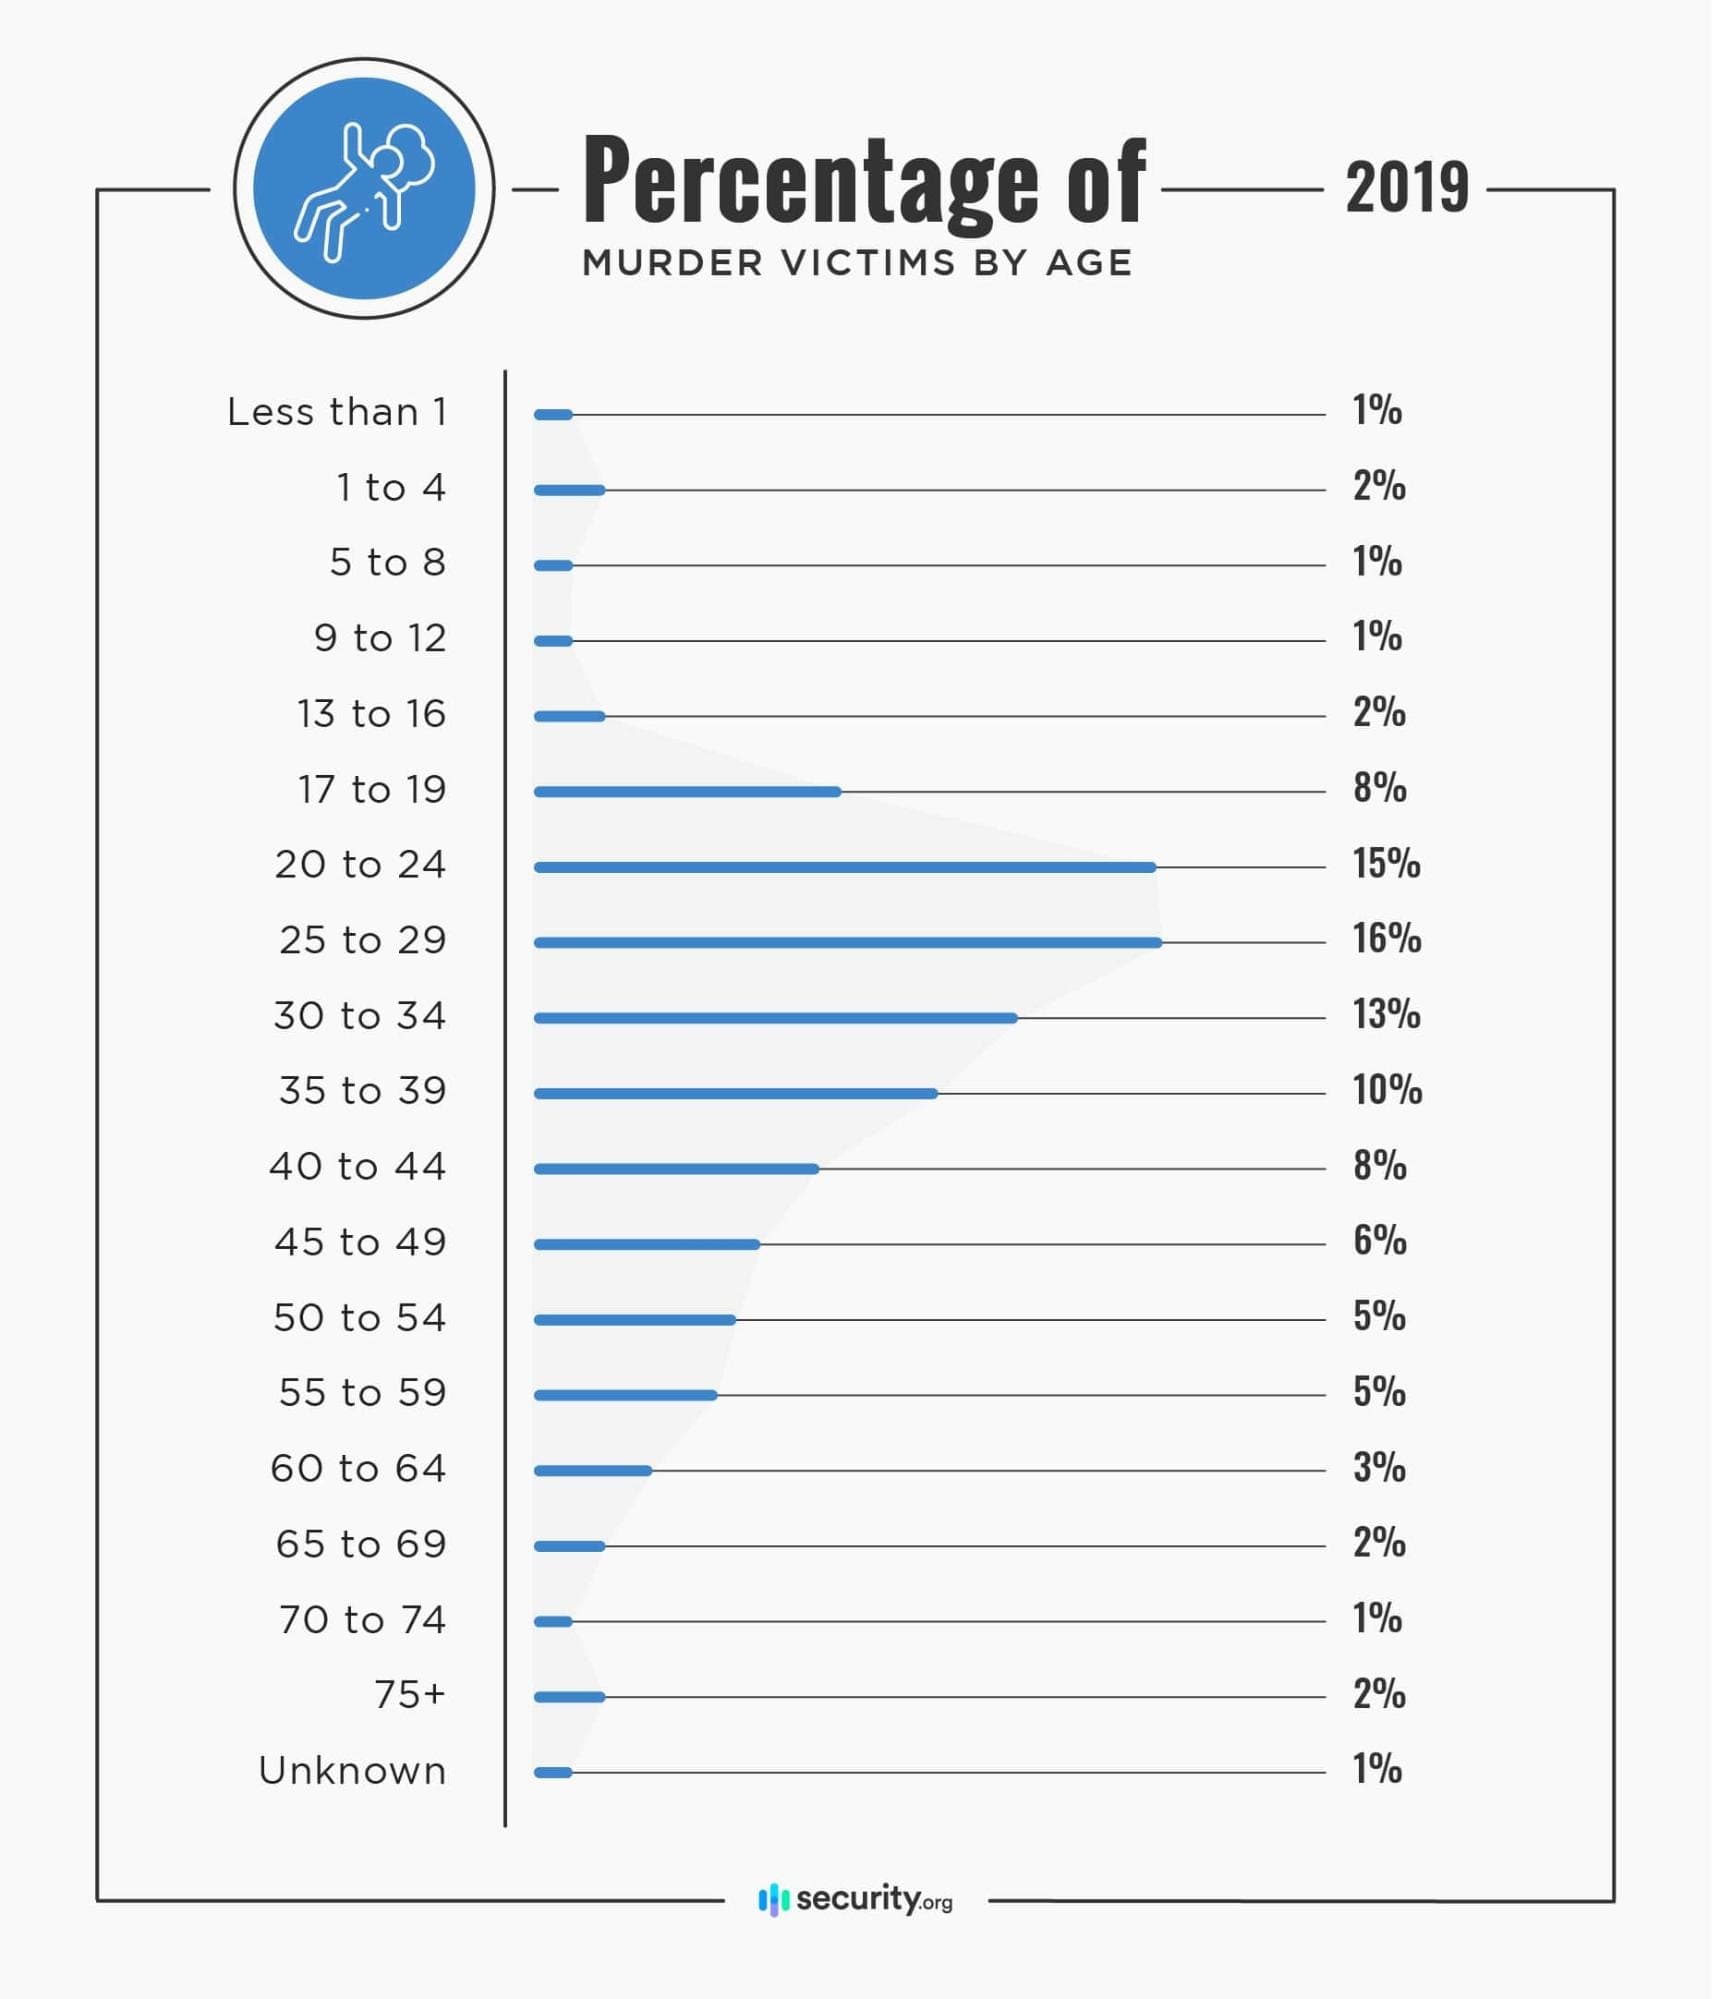 Percentage of muder victims by age in 2019